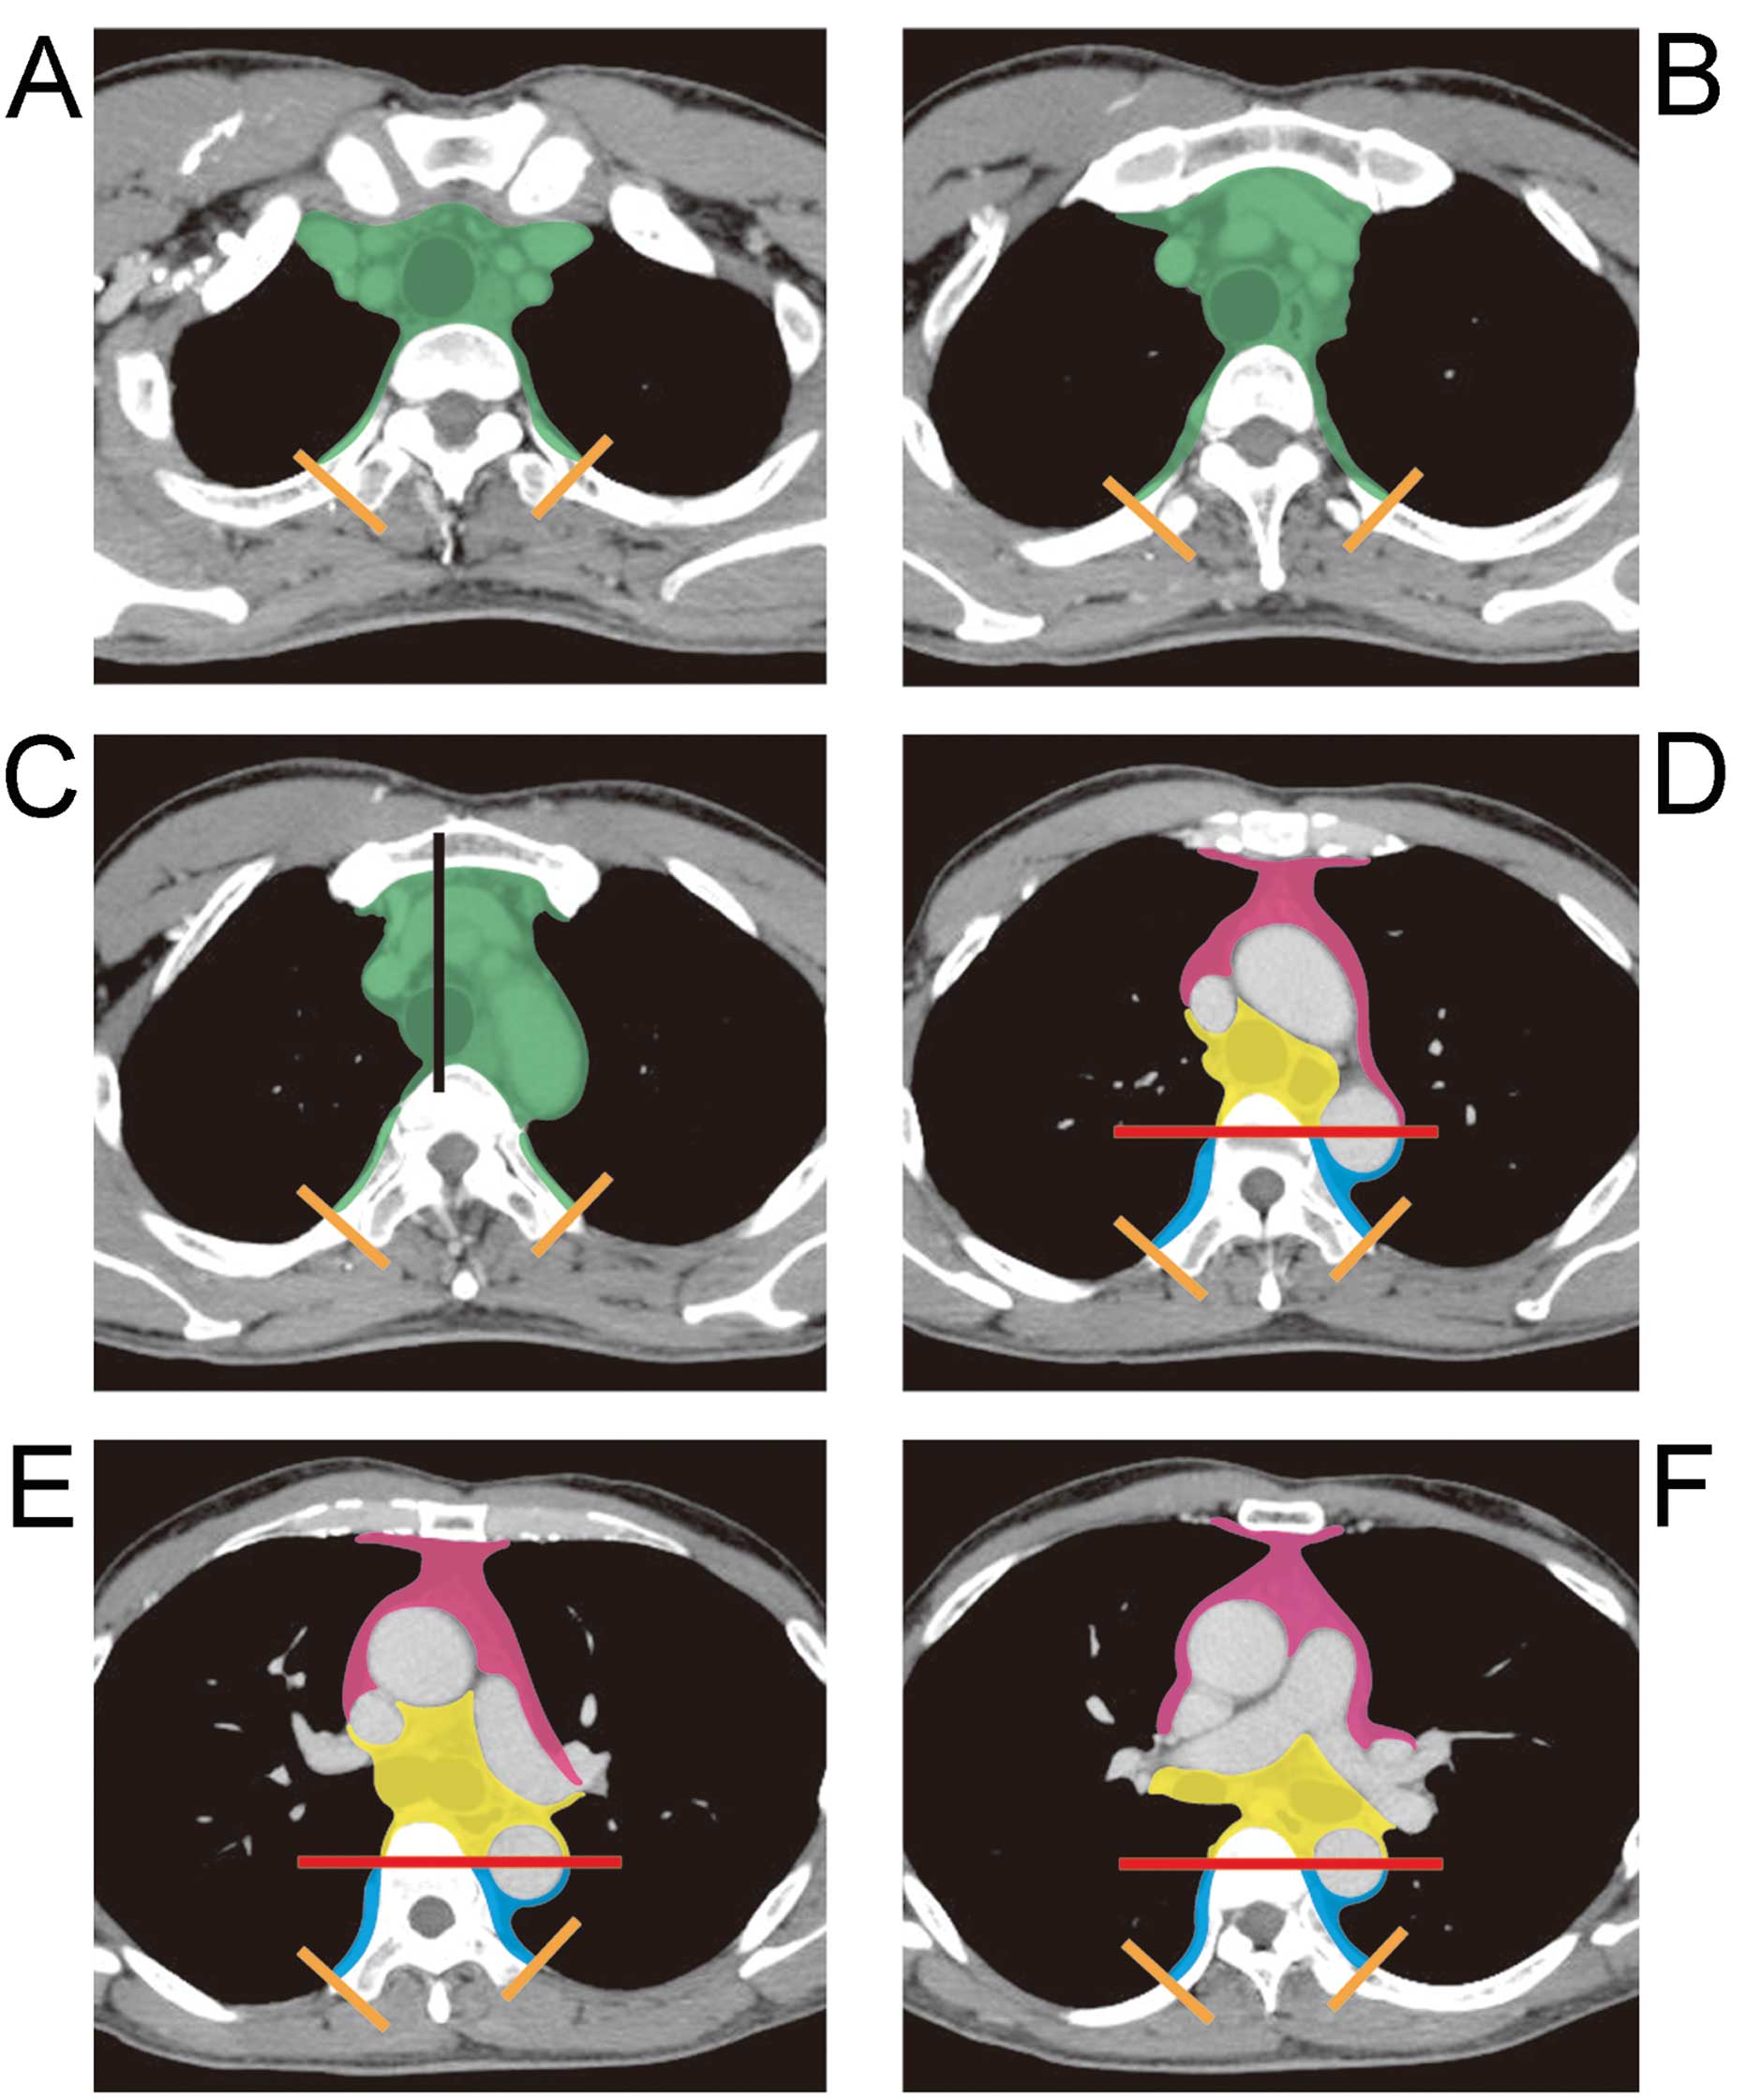 Proposal for a new mediastinal compartment classification of transverse